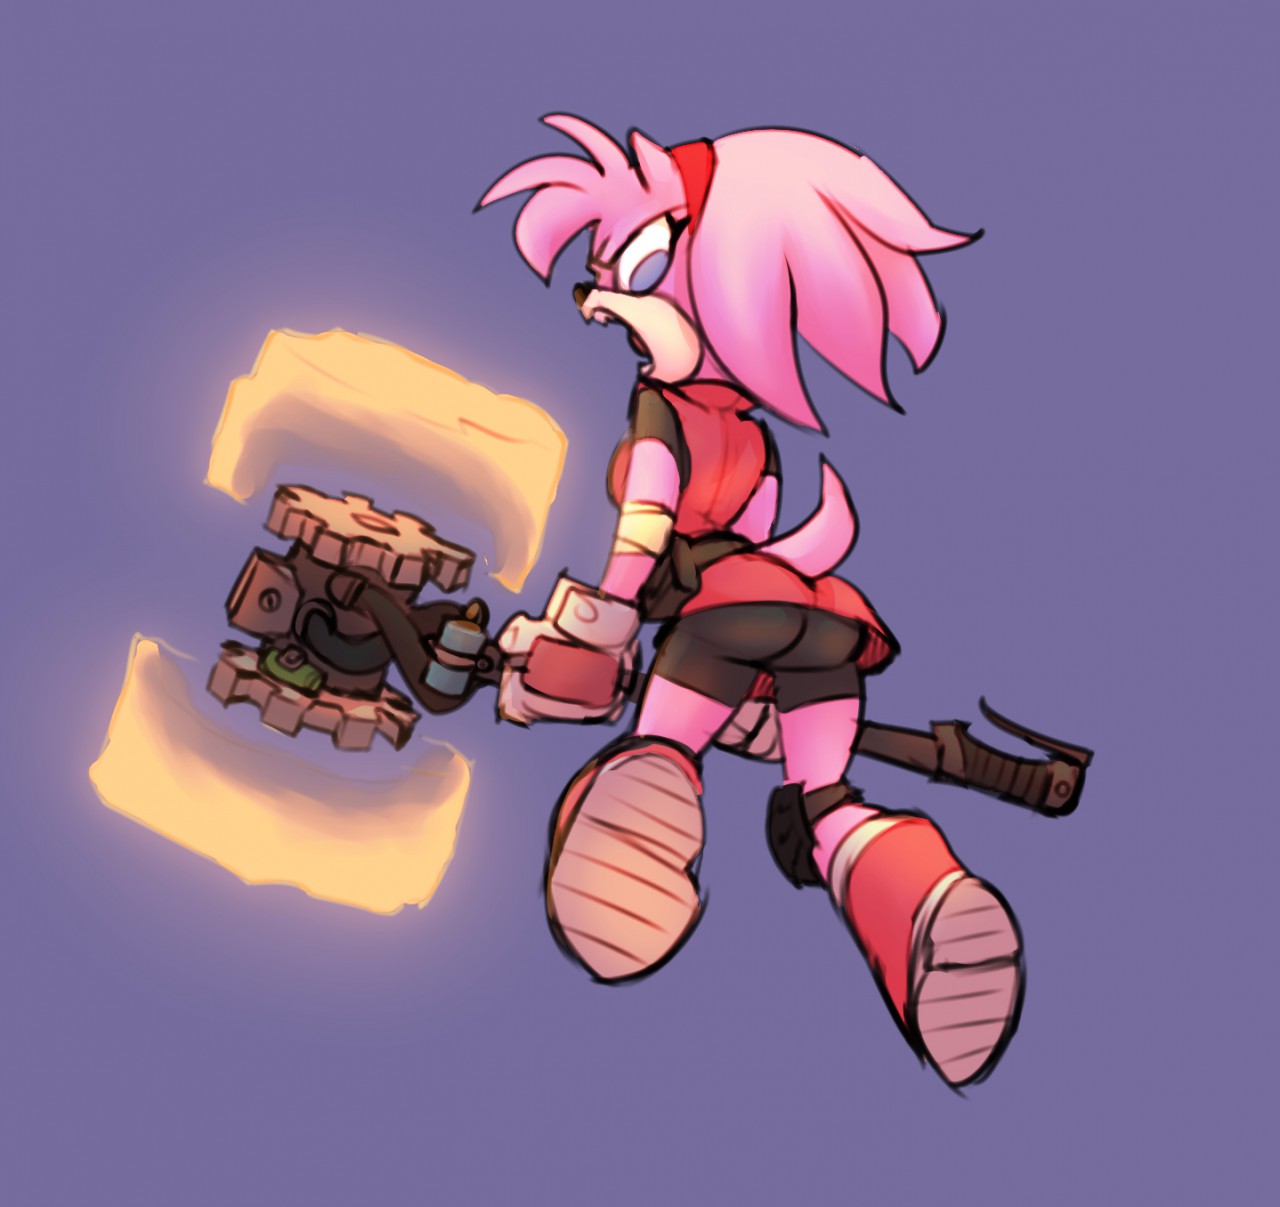 Amy and her Hammer. 